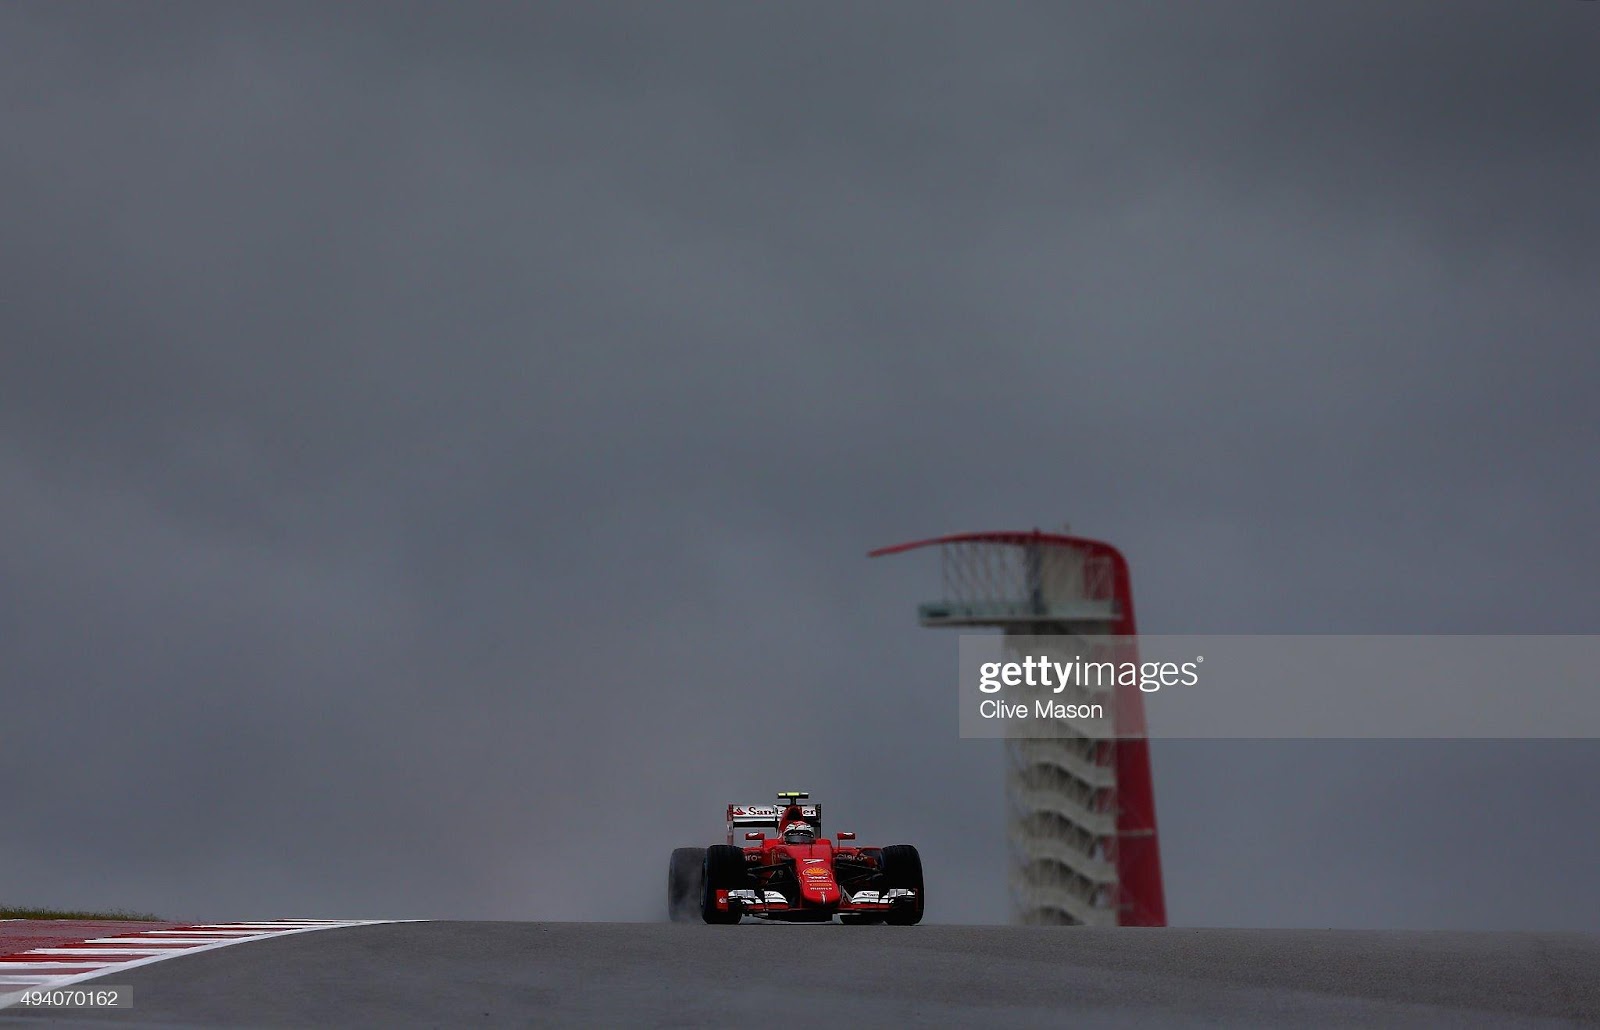 Kimi Raikkonen, Ferrari, drives during final practice for the United States F1 Grand Prix at Circuit of The Americas on October 24, 2015 in Austin, United States.